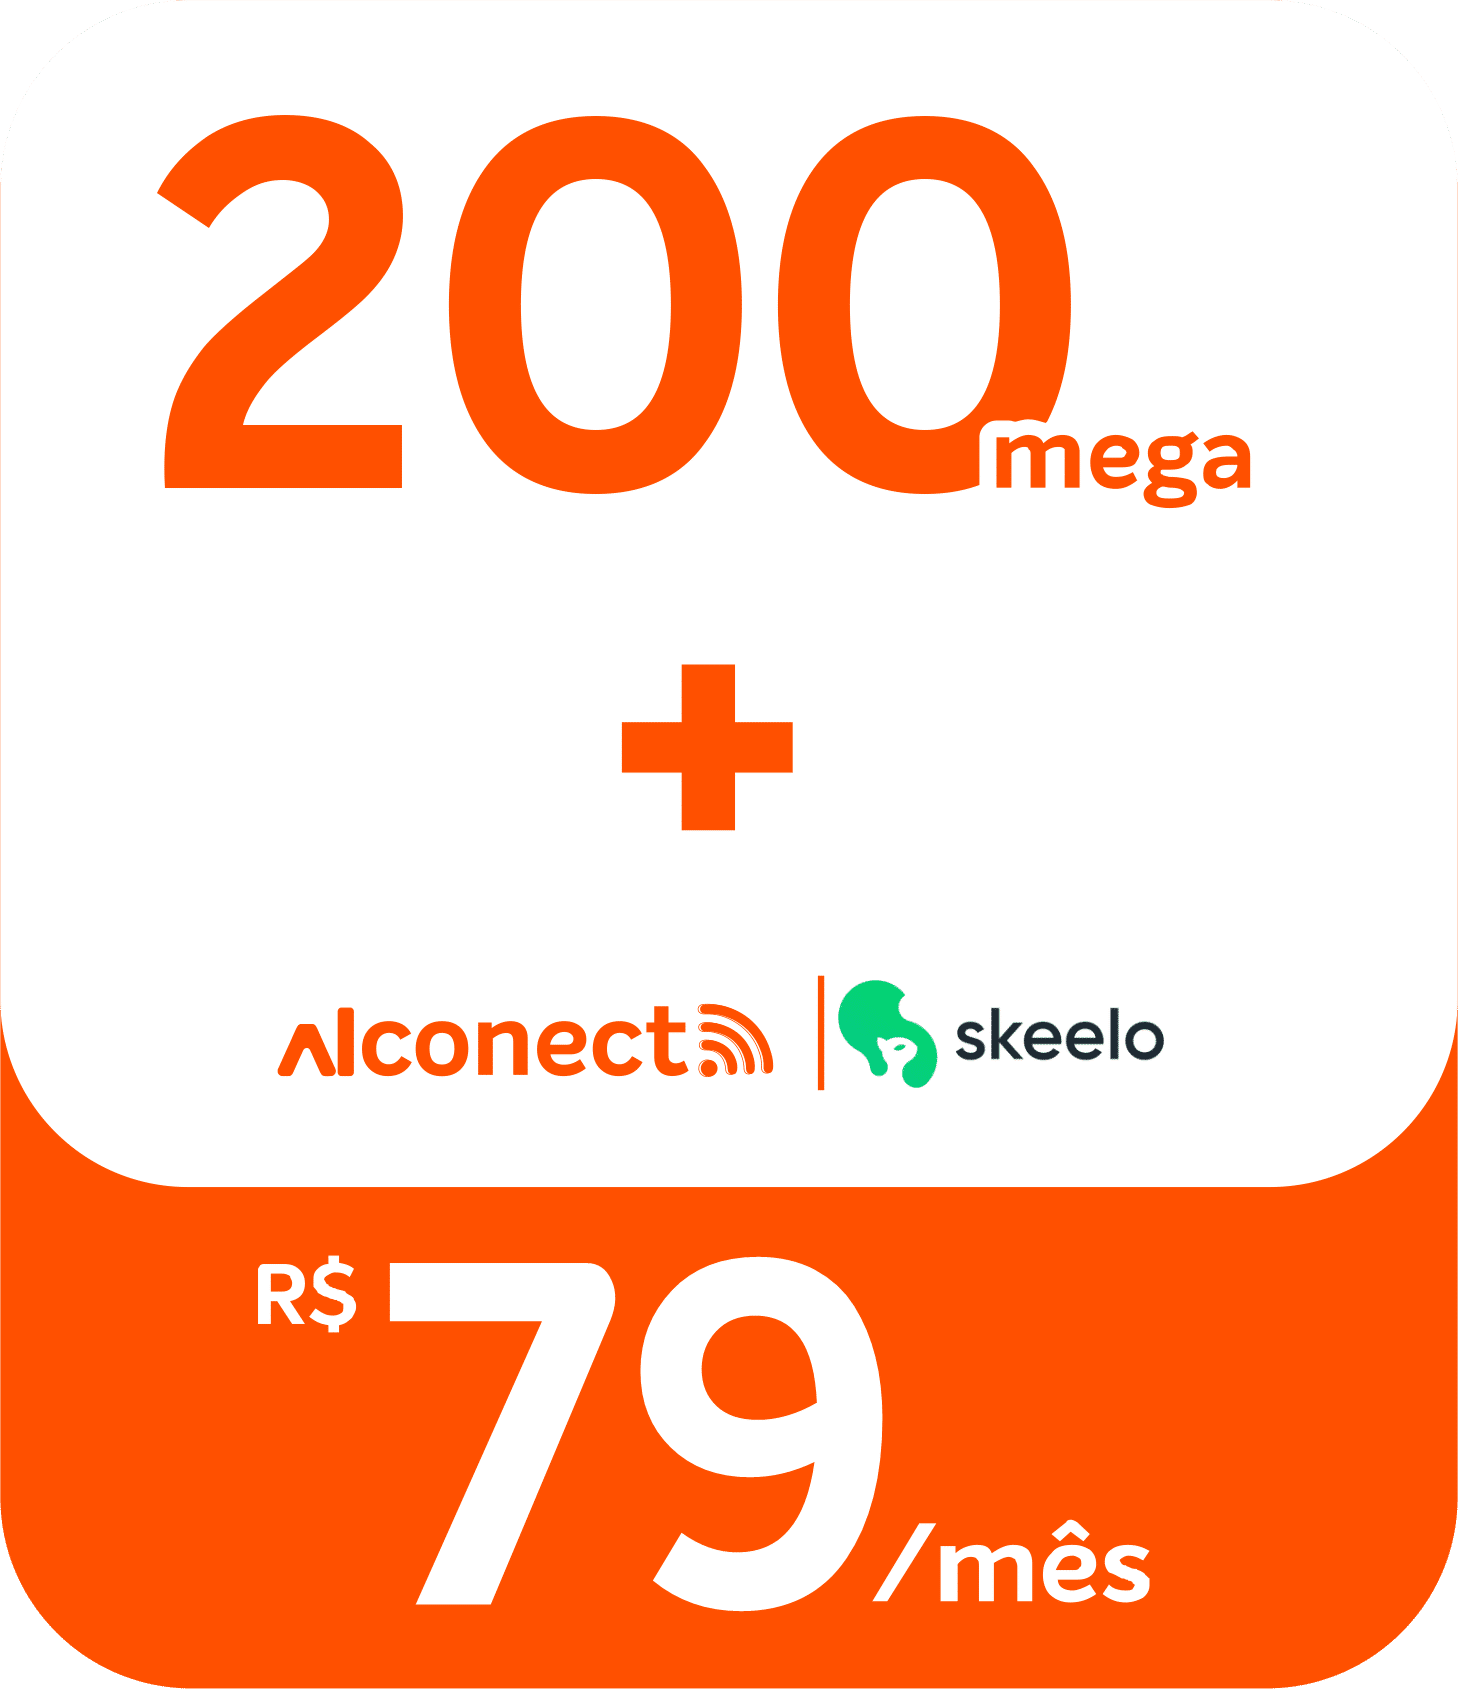 ALCONECT 200 MB R$ 79,00